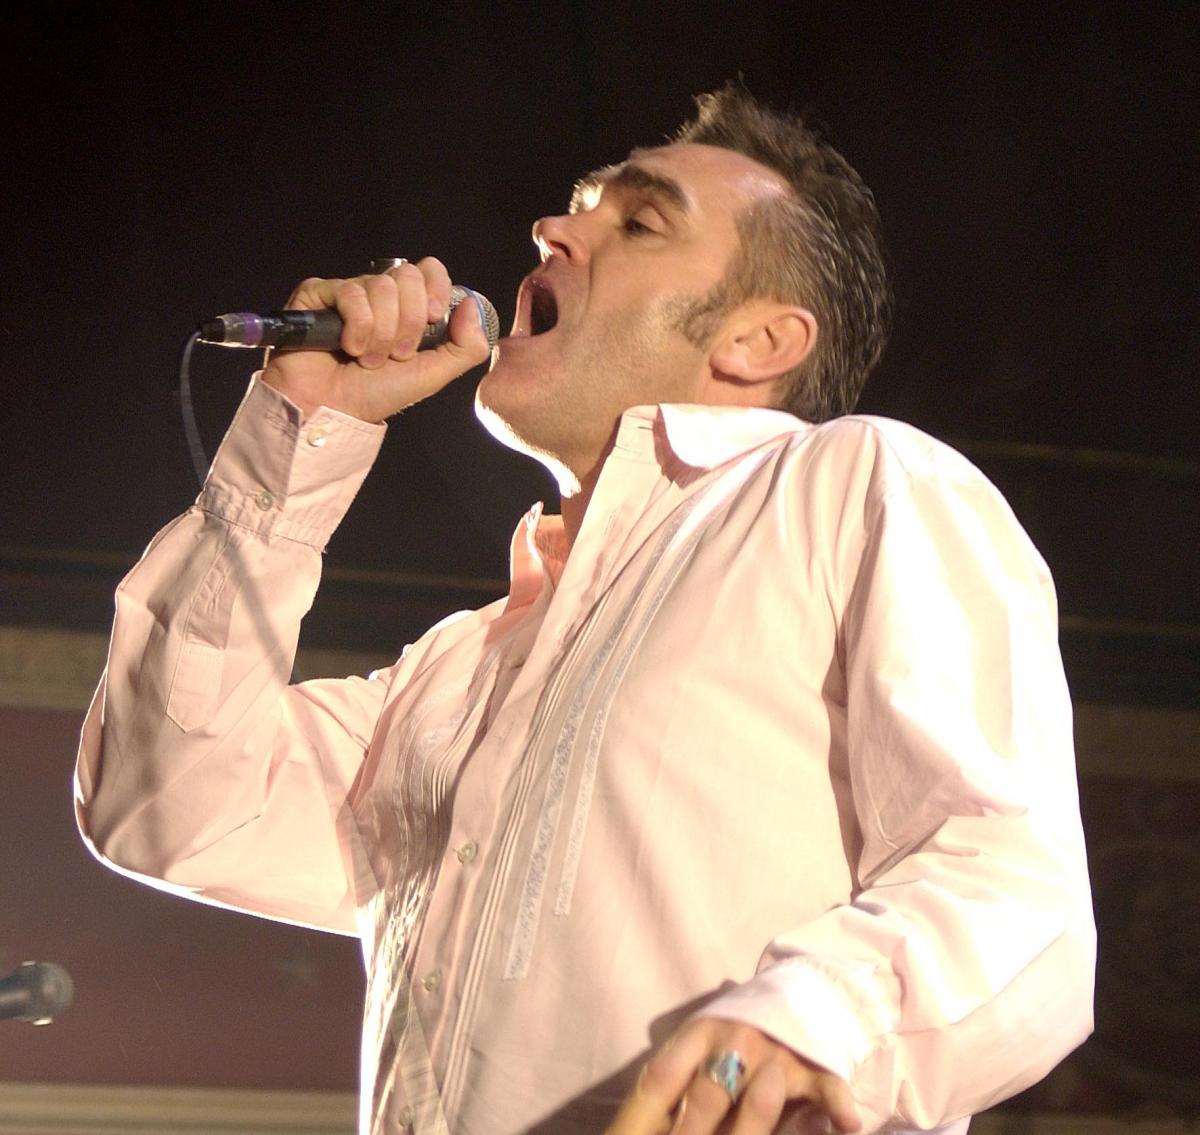 Morrissey on stage St George's Hall in October 2002